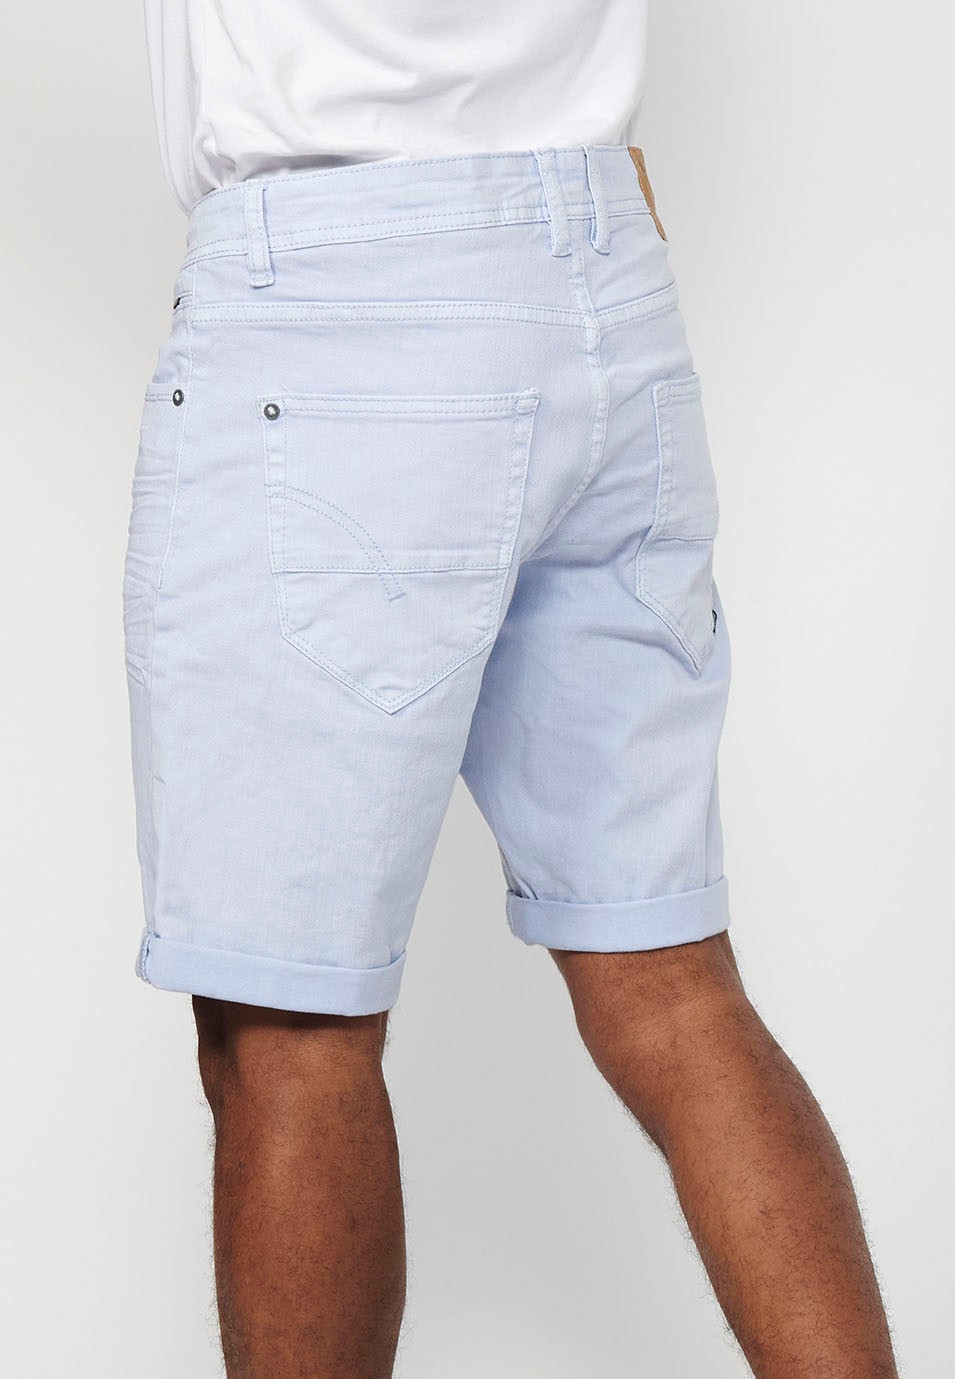 Denim Bermuda shorts with cuffed finish and front zipper and button closure. Five pockets, one blue color pocket for men 4